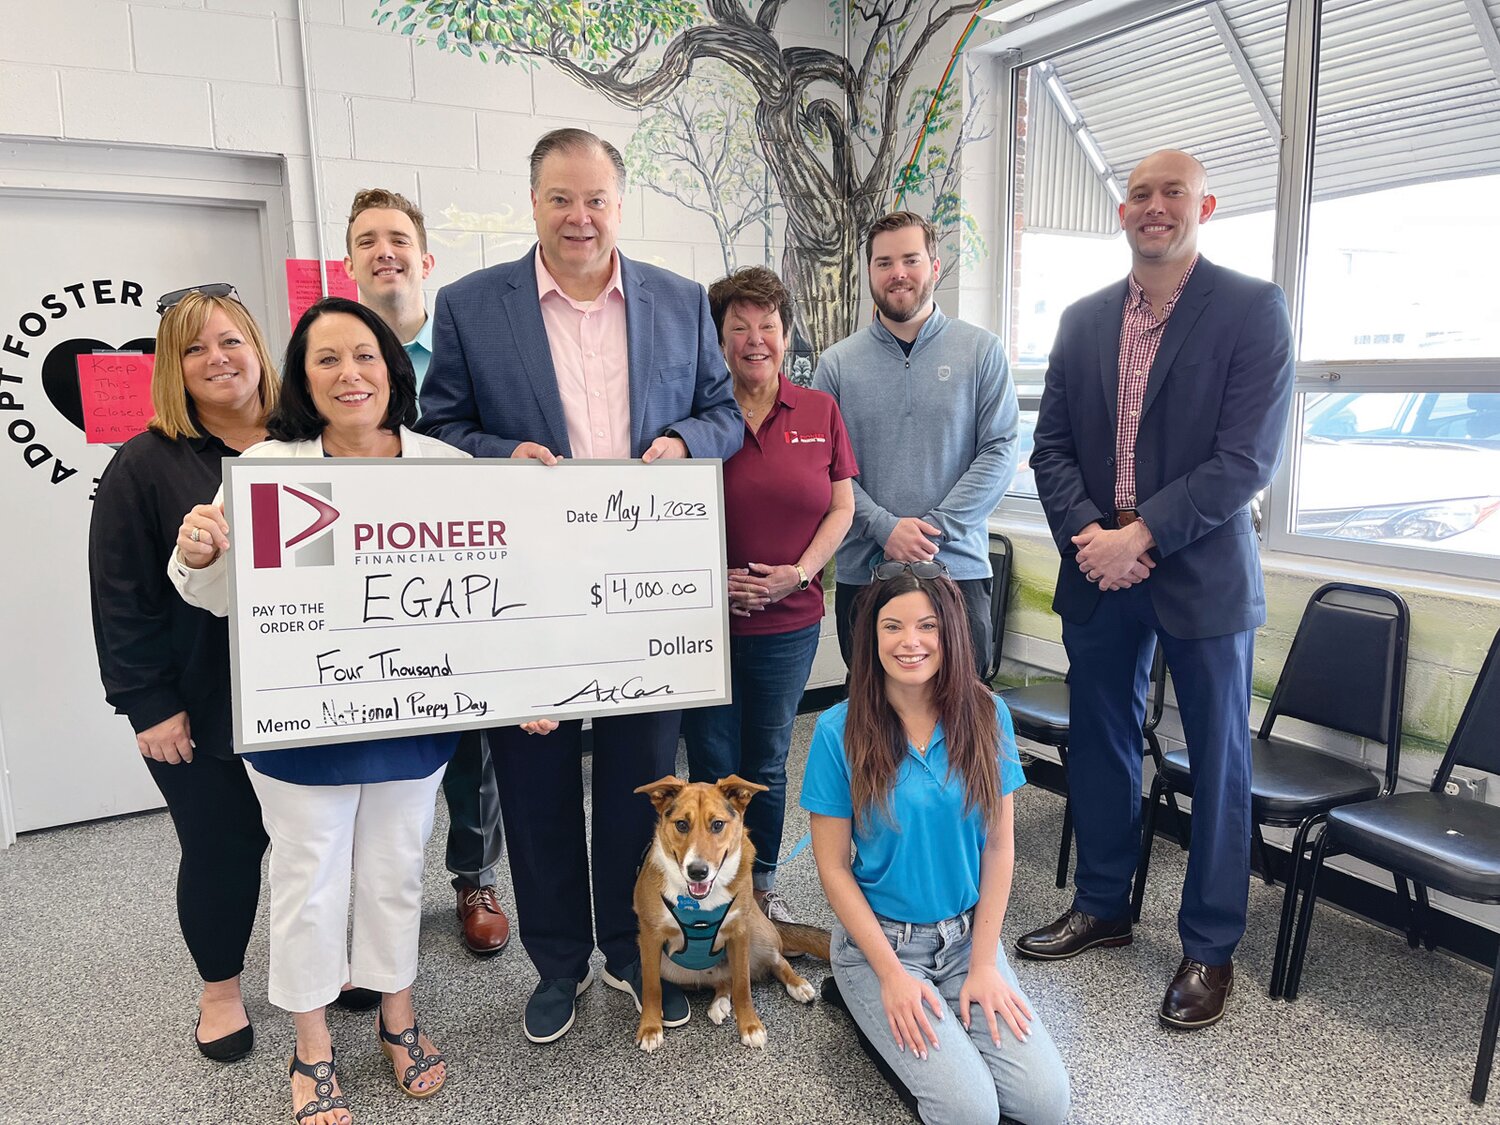 Tammy Gallo Executive Director of Heart of RI received the donation from Arthur Colello from Pioneer Financial along with Gail, Katlyn and John Colello. As well as Stacy Guenette, Michael Toole and Erik Johnson. Plus, their family pup Rosco Colello!